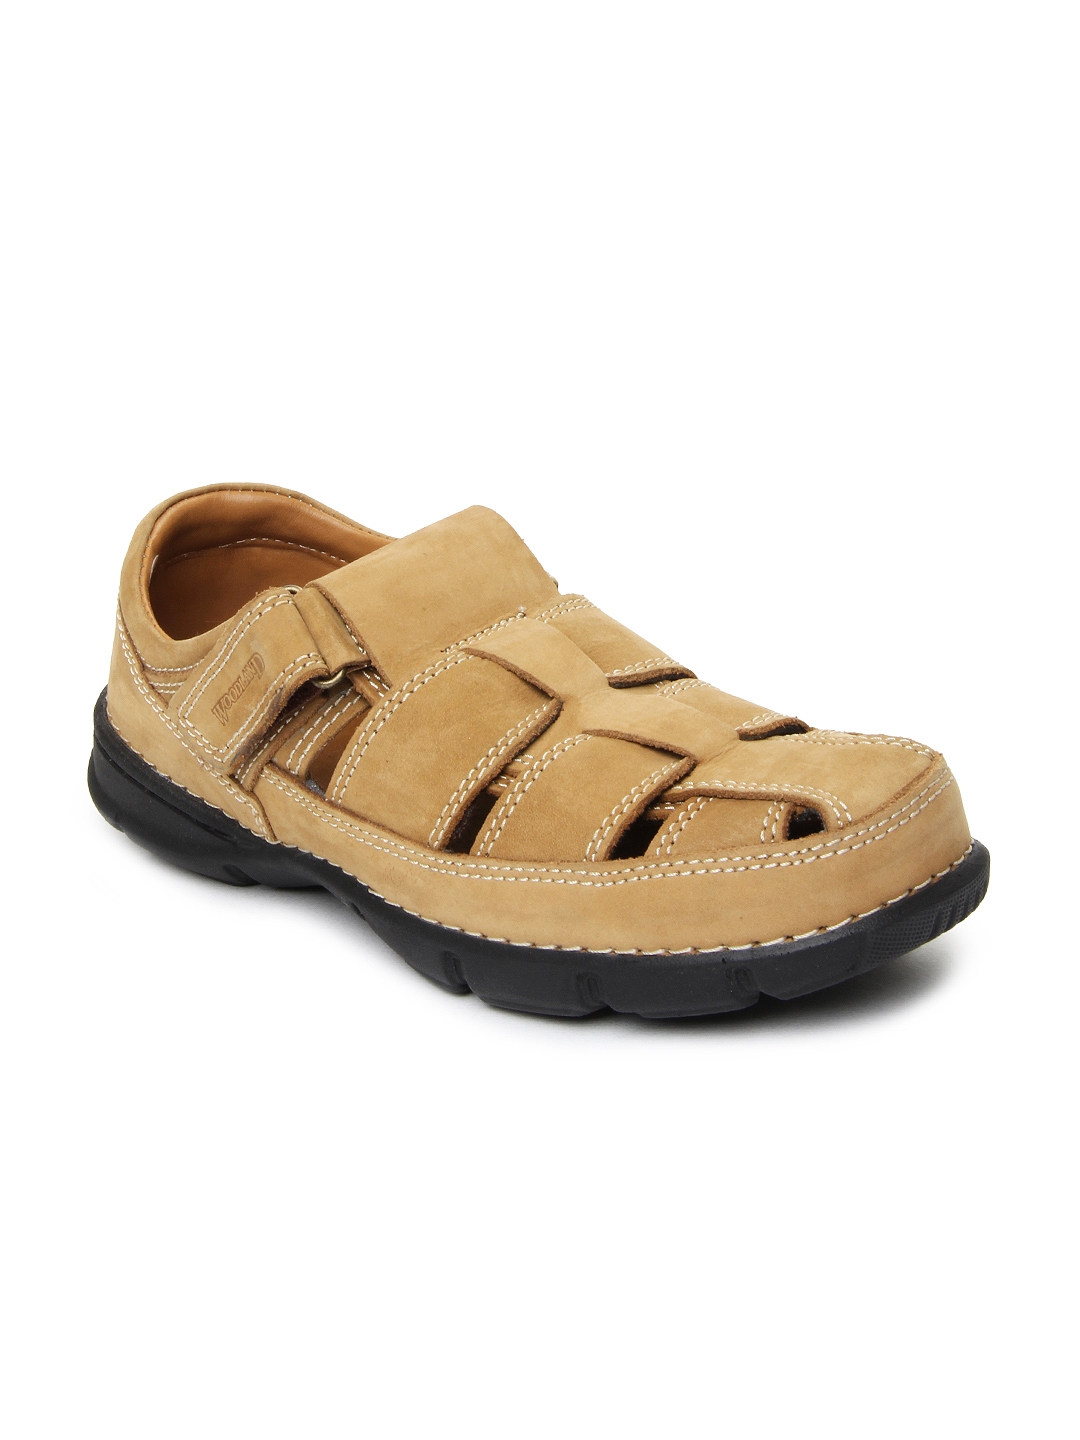 39% off on Men's Genuine Leather Sandals | OneDayOnly-sgquangbinhtourist.com.vn